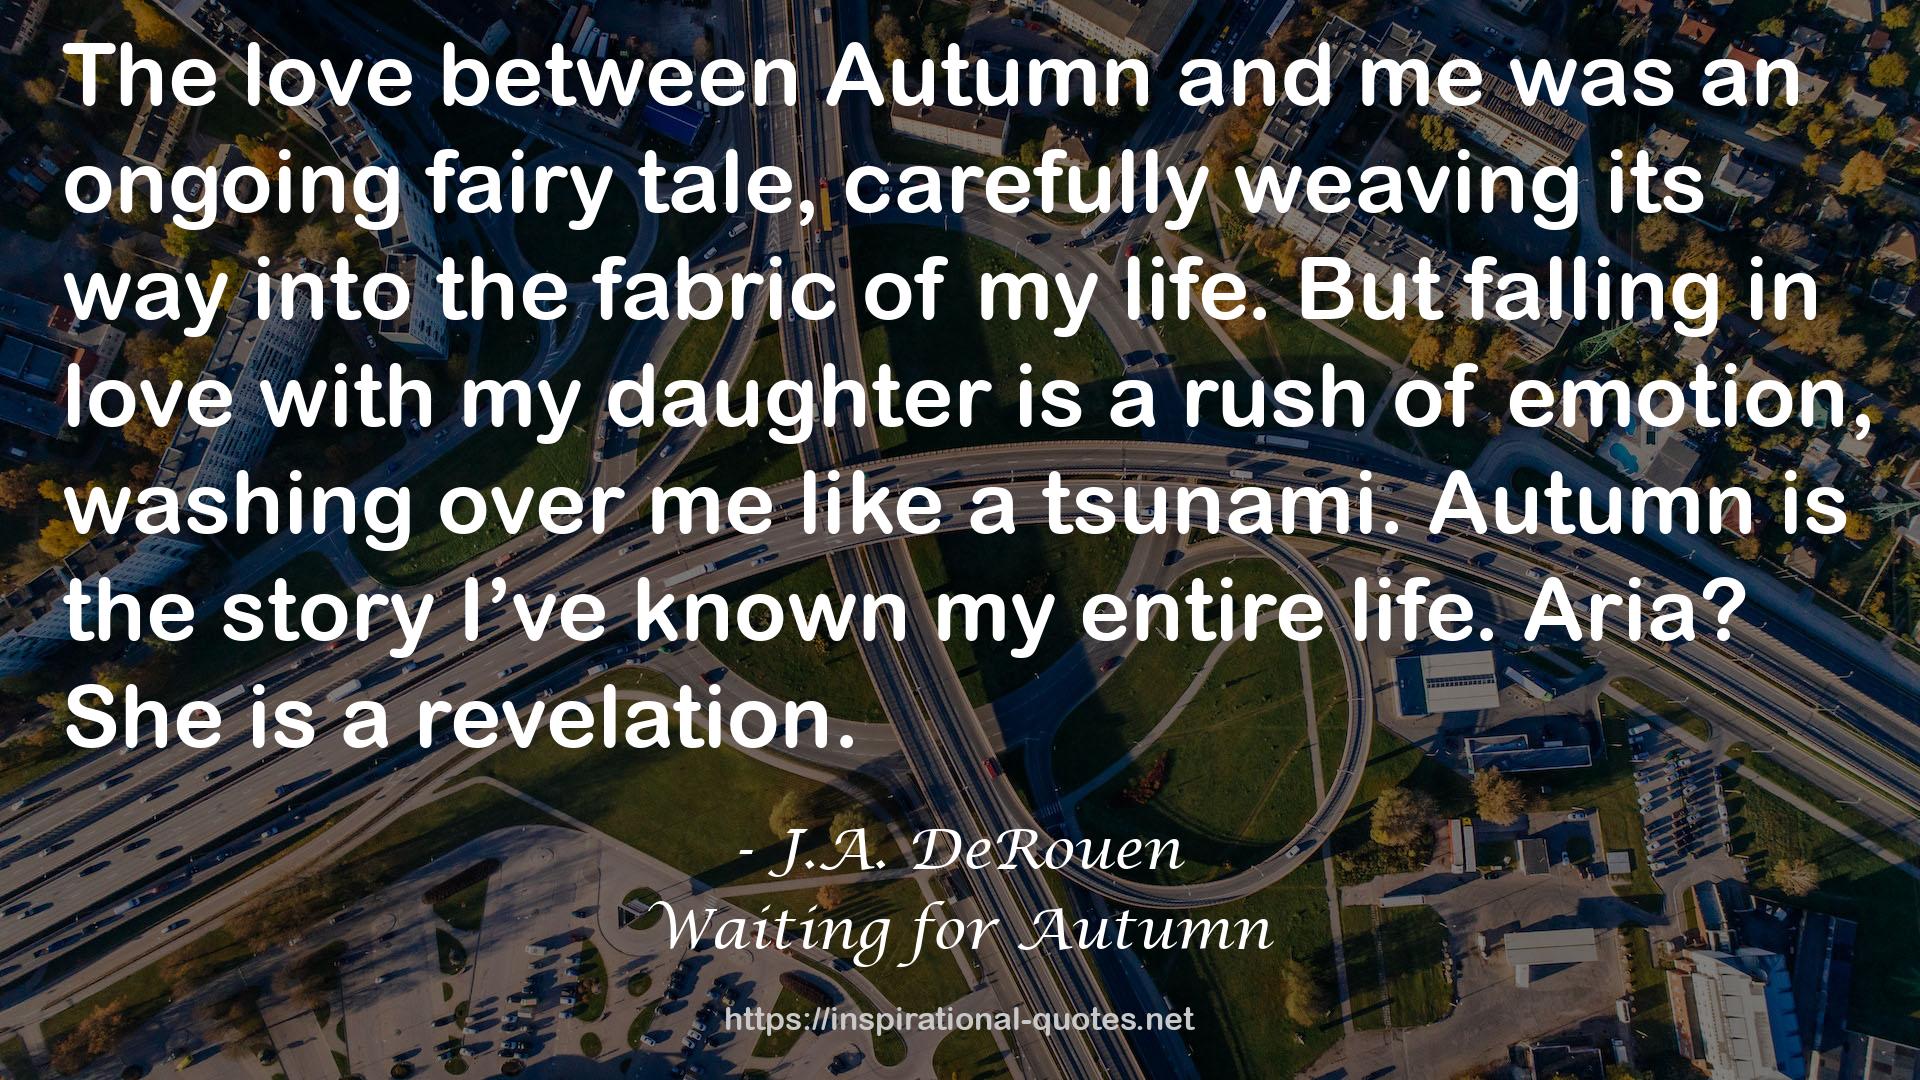 Waiting for Autumn QUOTES